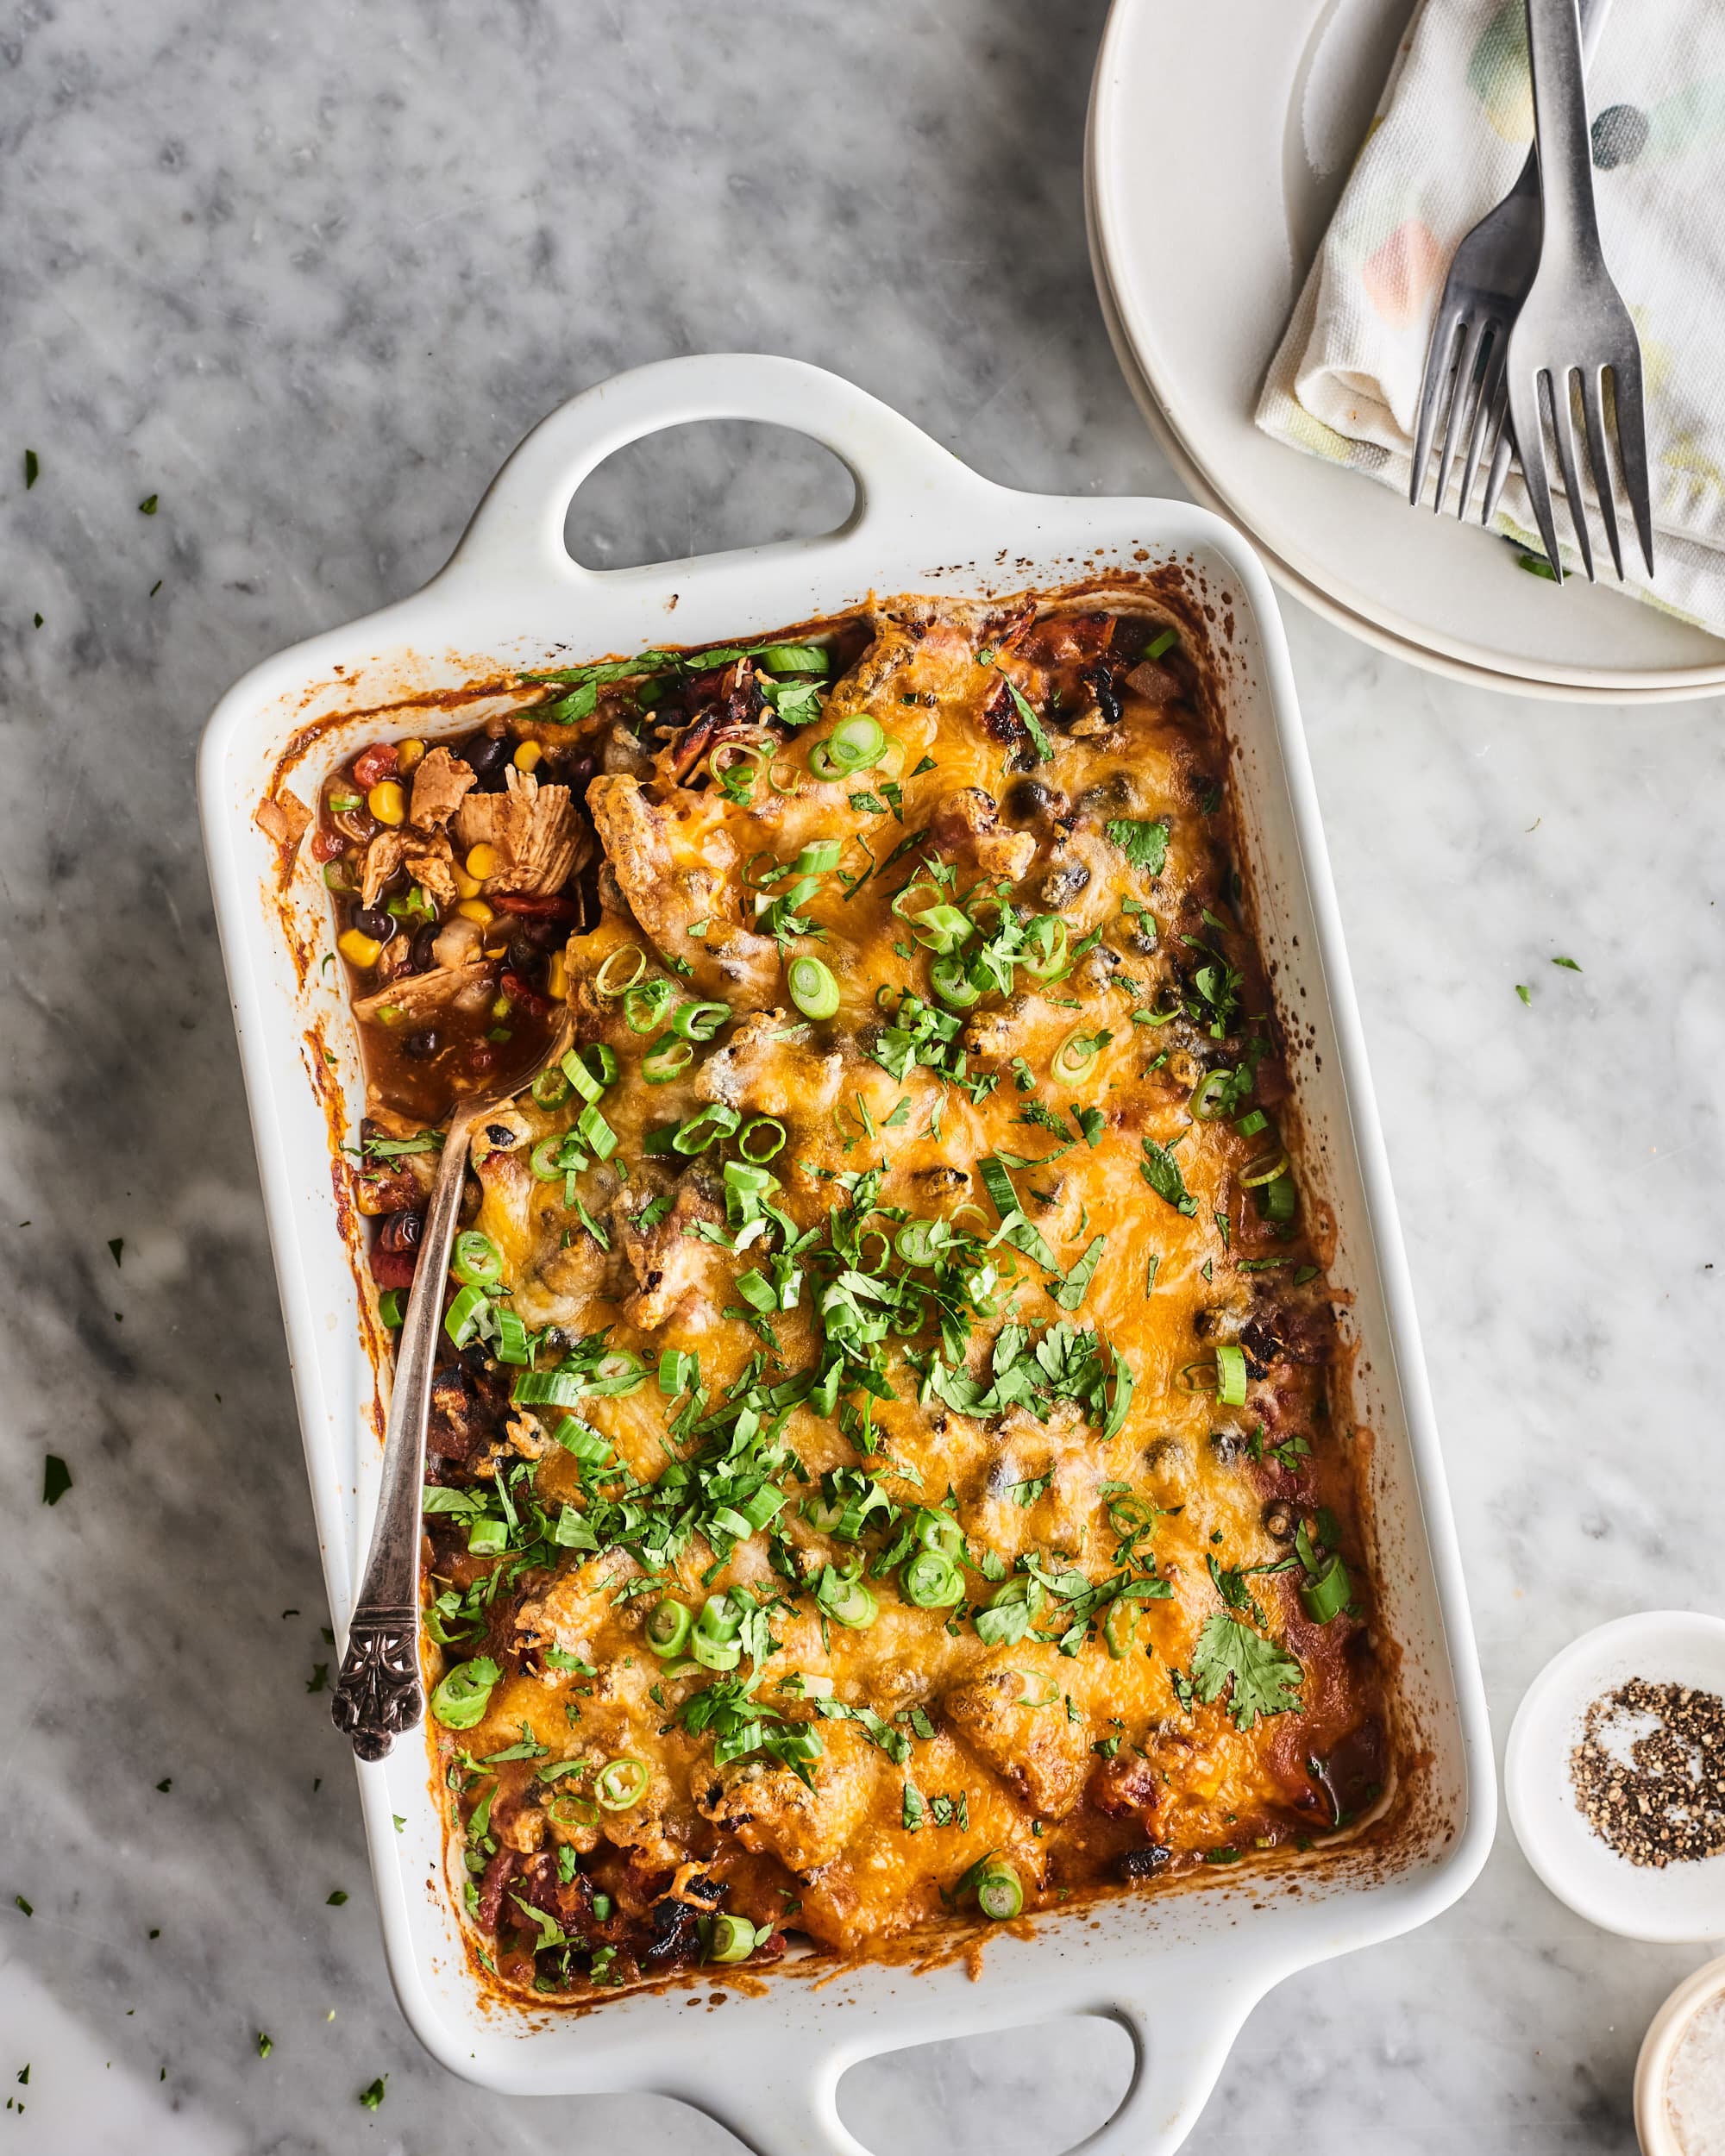 Molly Yeh's white bean hotdish recipe is a cheesy, saucy comfort